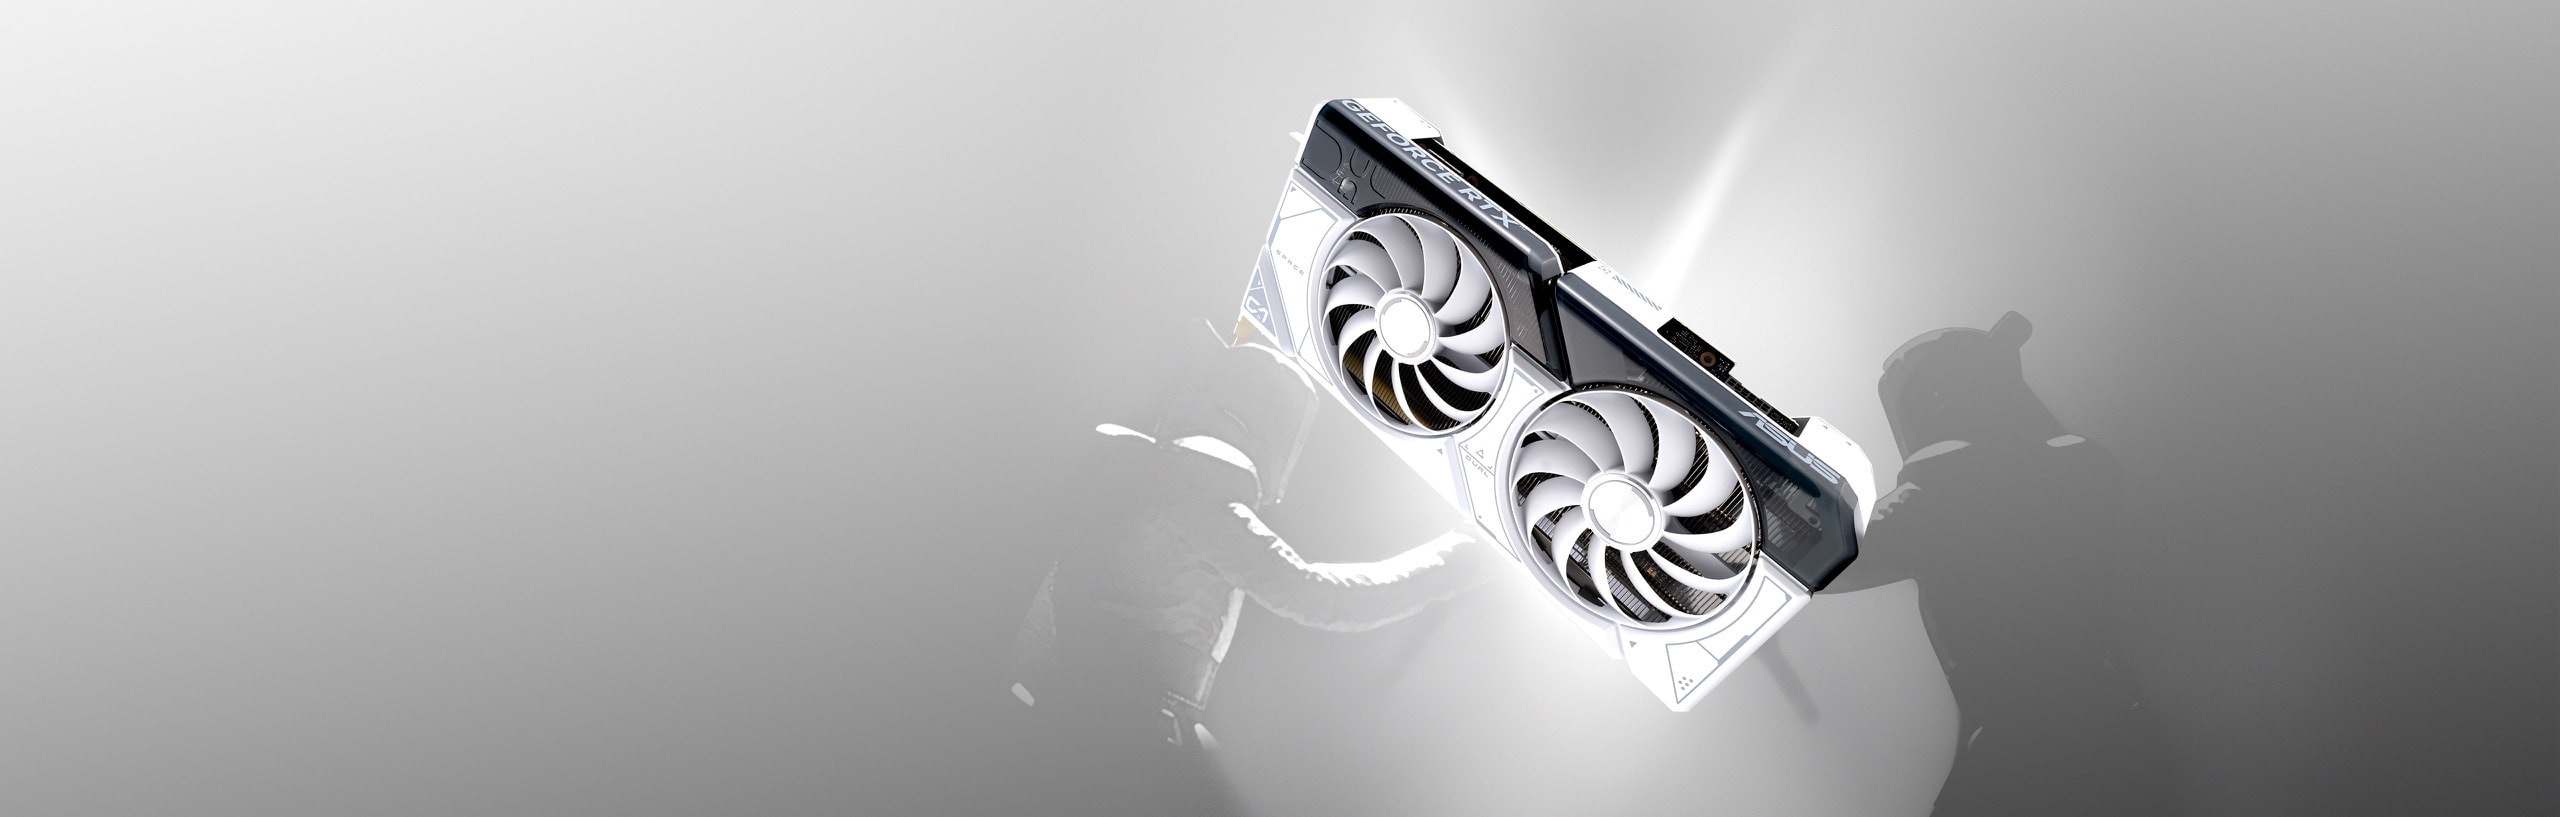 Front view of the ASUS Dual GeForce RTX™ 4070 SUPER White Edition graphics card with two men fighting in the background.  